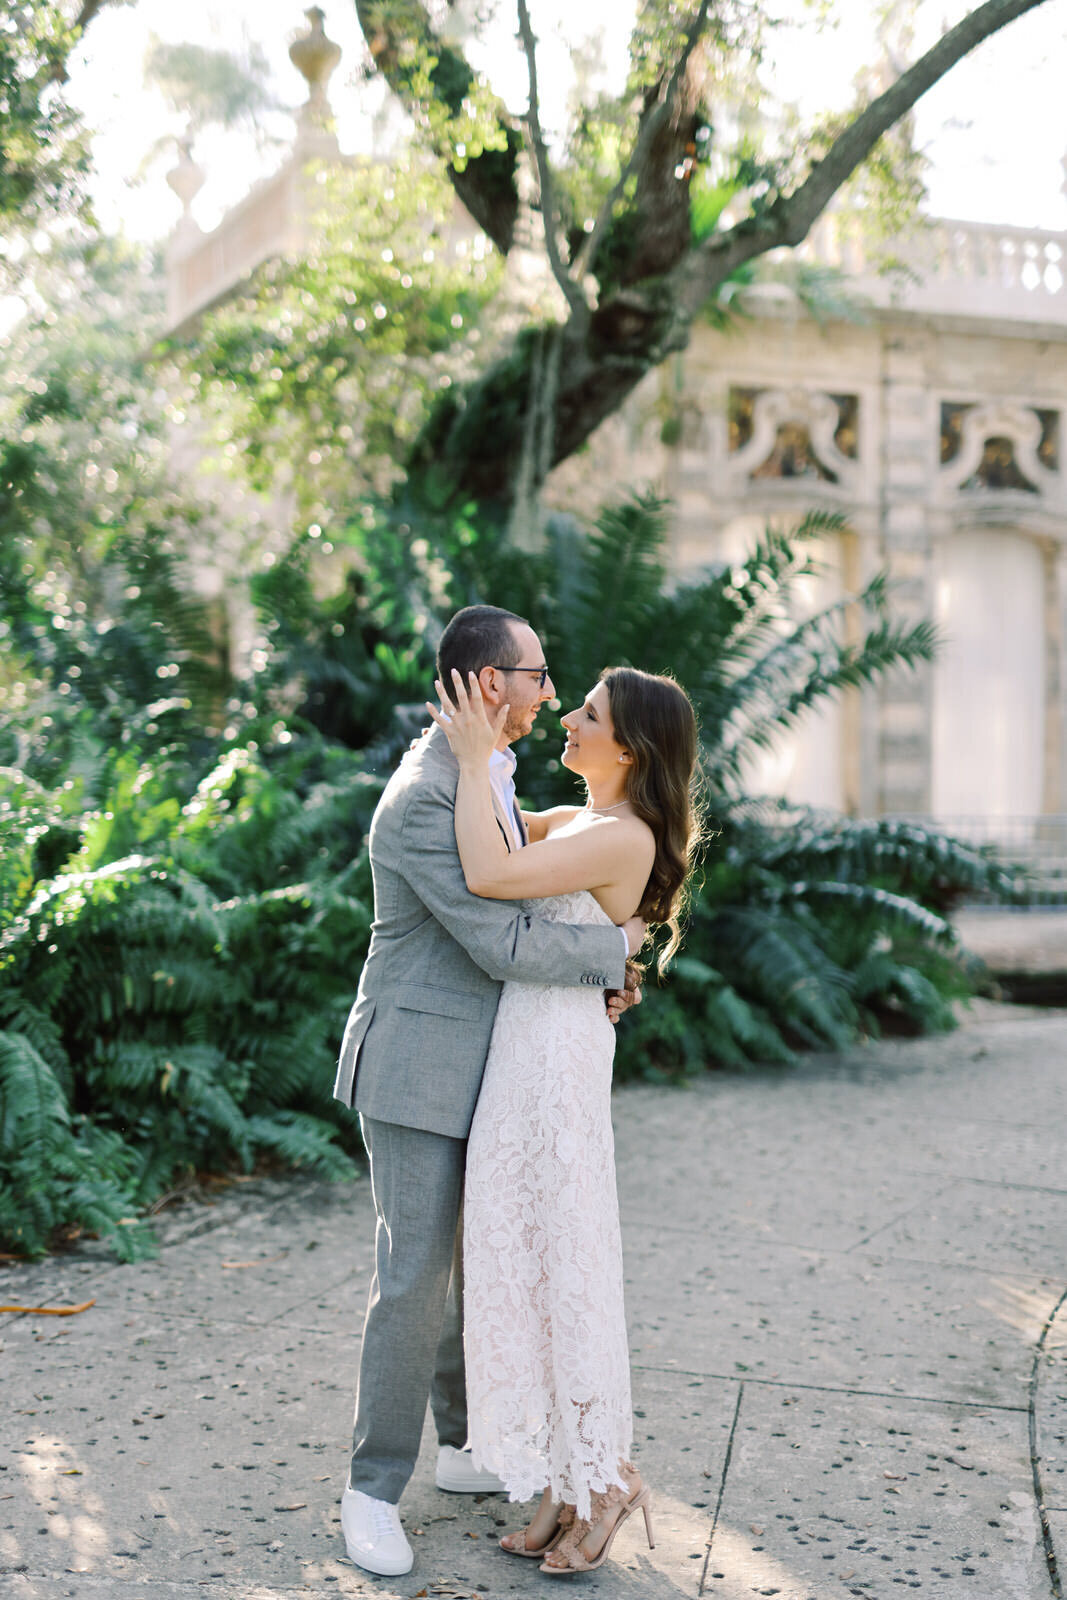 A Stylish and Chic Engagement Session at Vizcaya Museum in Miami Florida 12